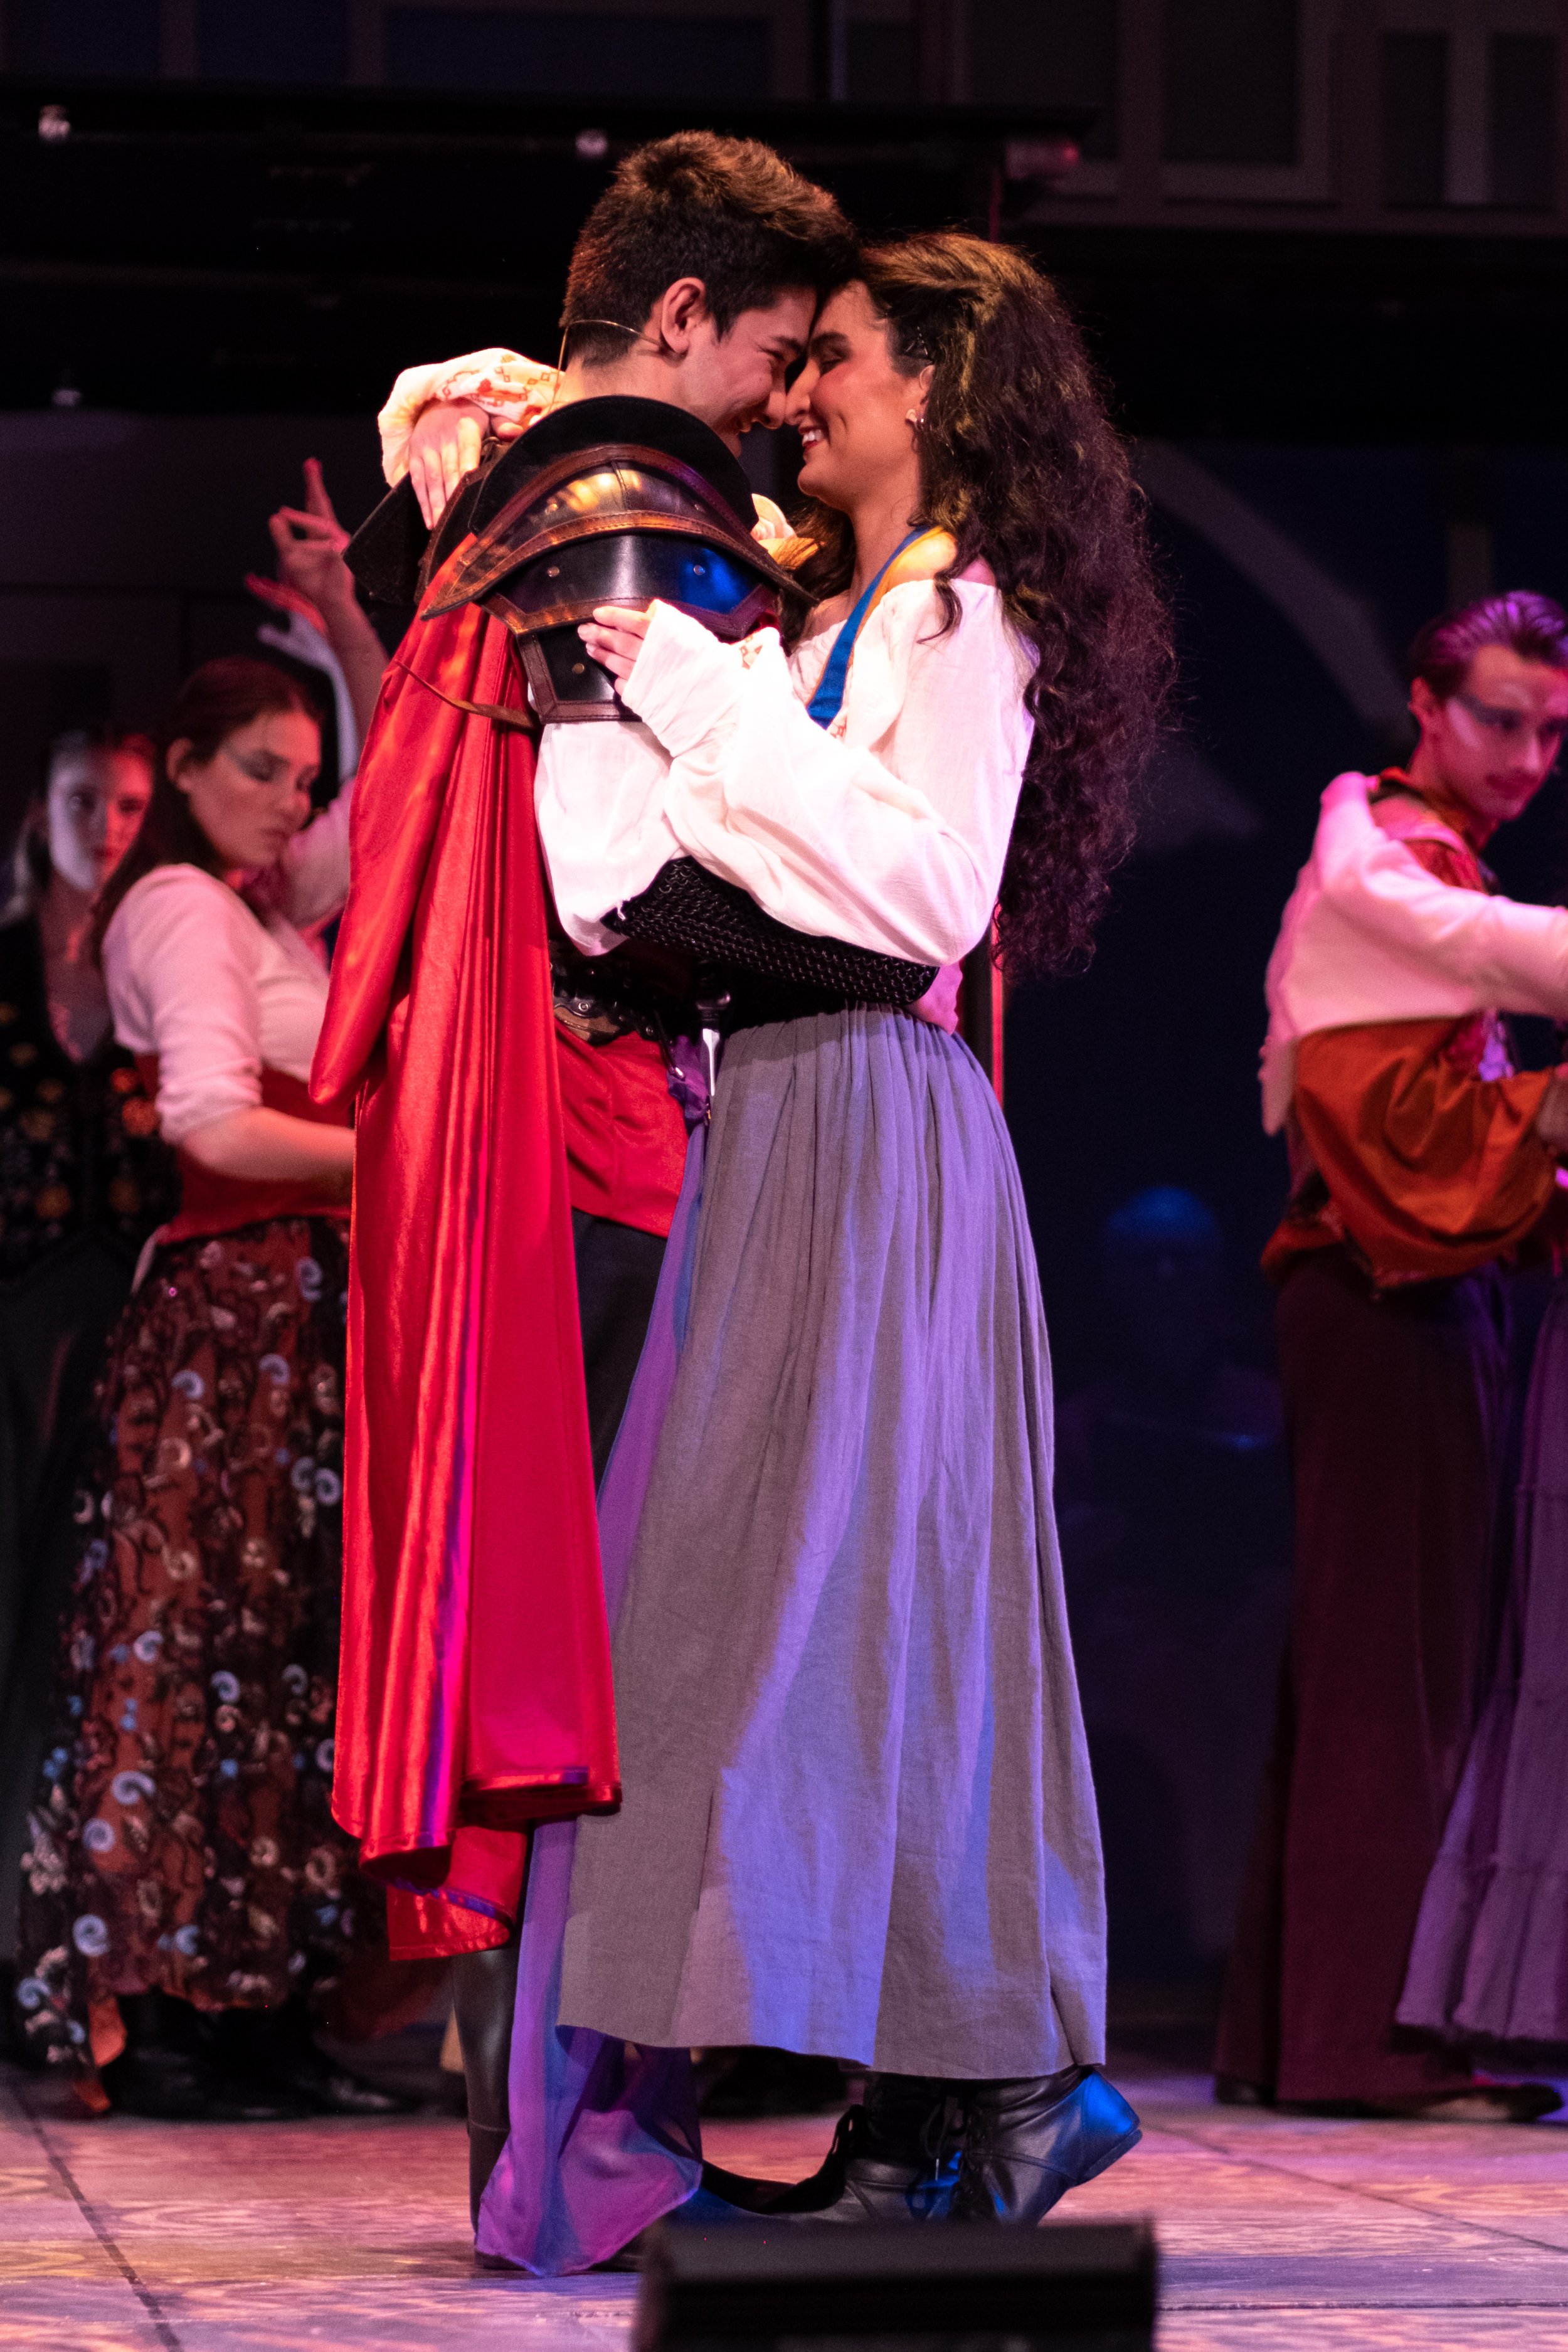  Esmeralda, played by Tayla Sindel, and Captain Phoebus de Martin, played by Joseph Martinez, find themselves in a romantic embrace during the musical production, The Hunchback of Notre Dame, during rehearsal on Thursday, March 30, 2023 at Santa Moni